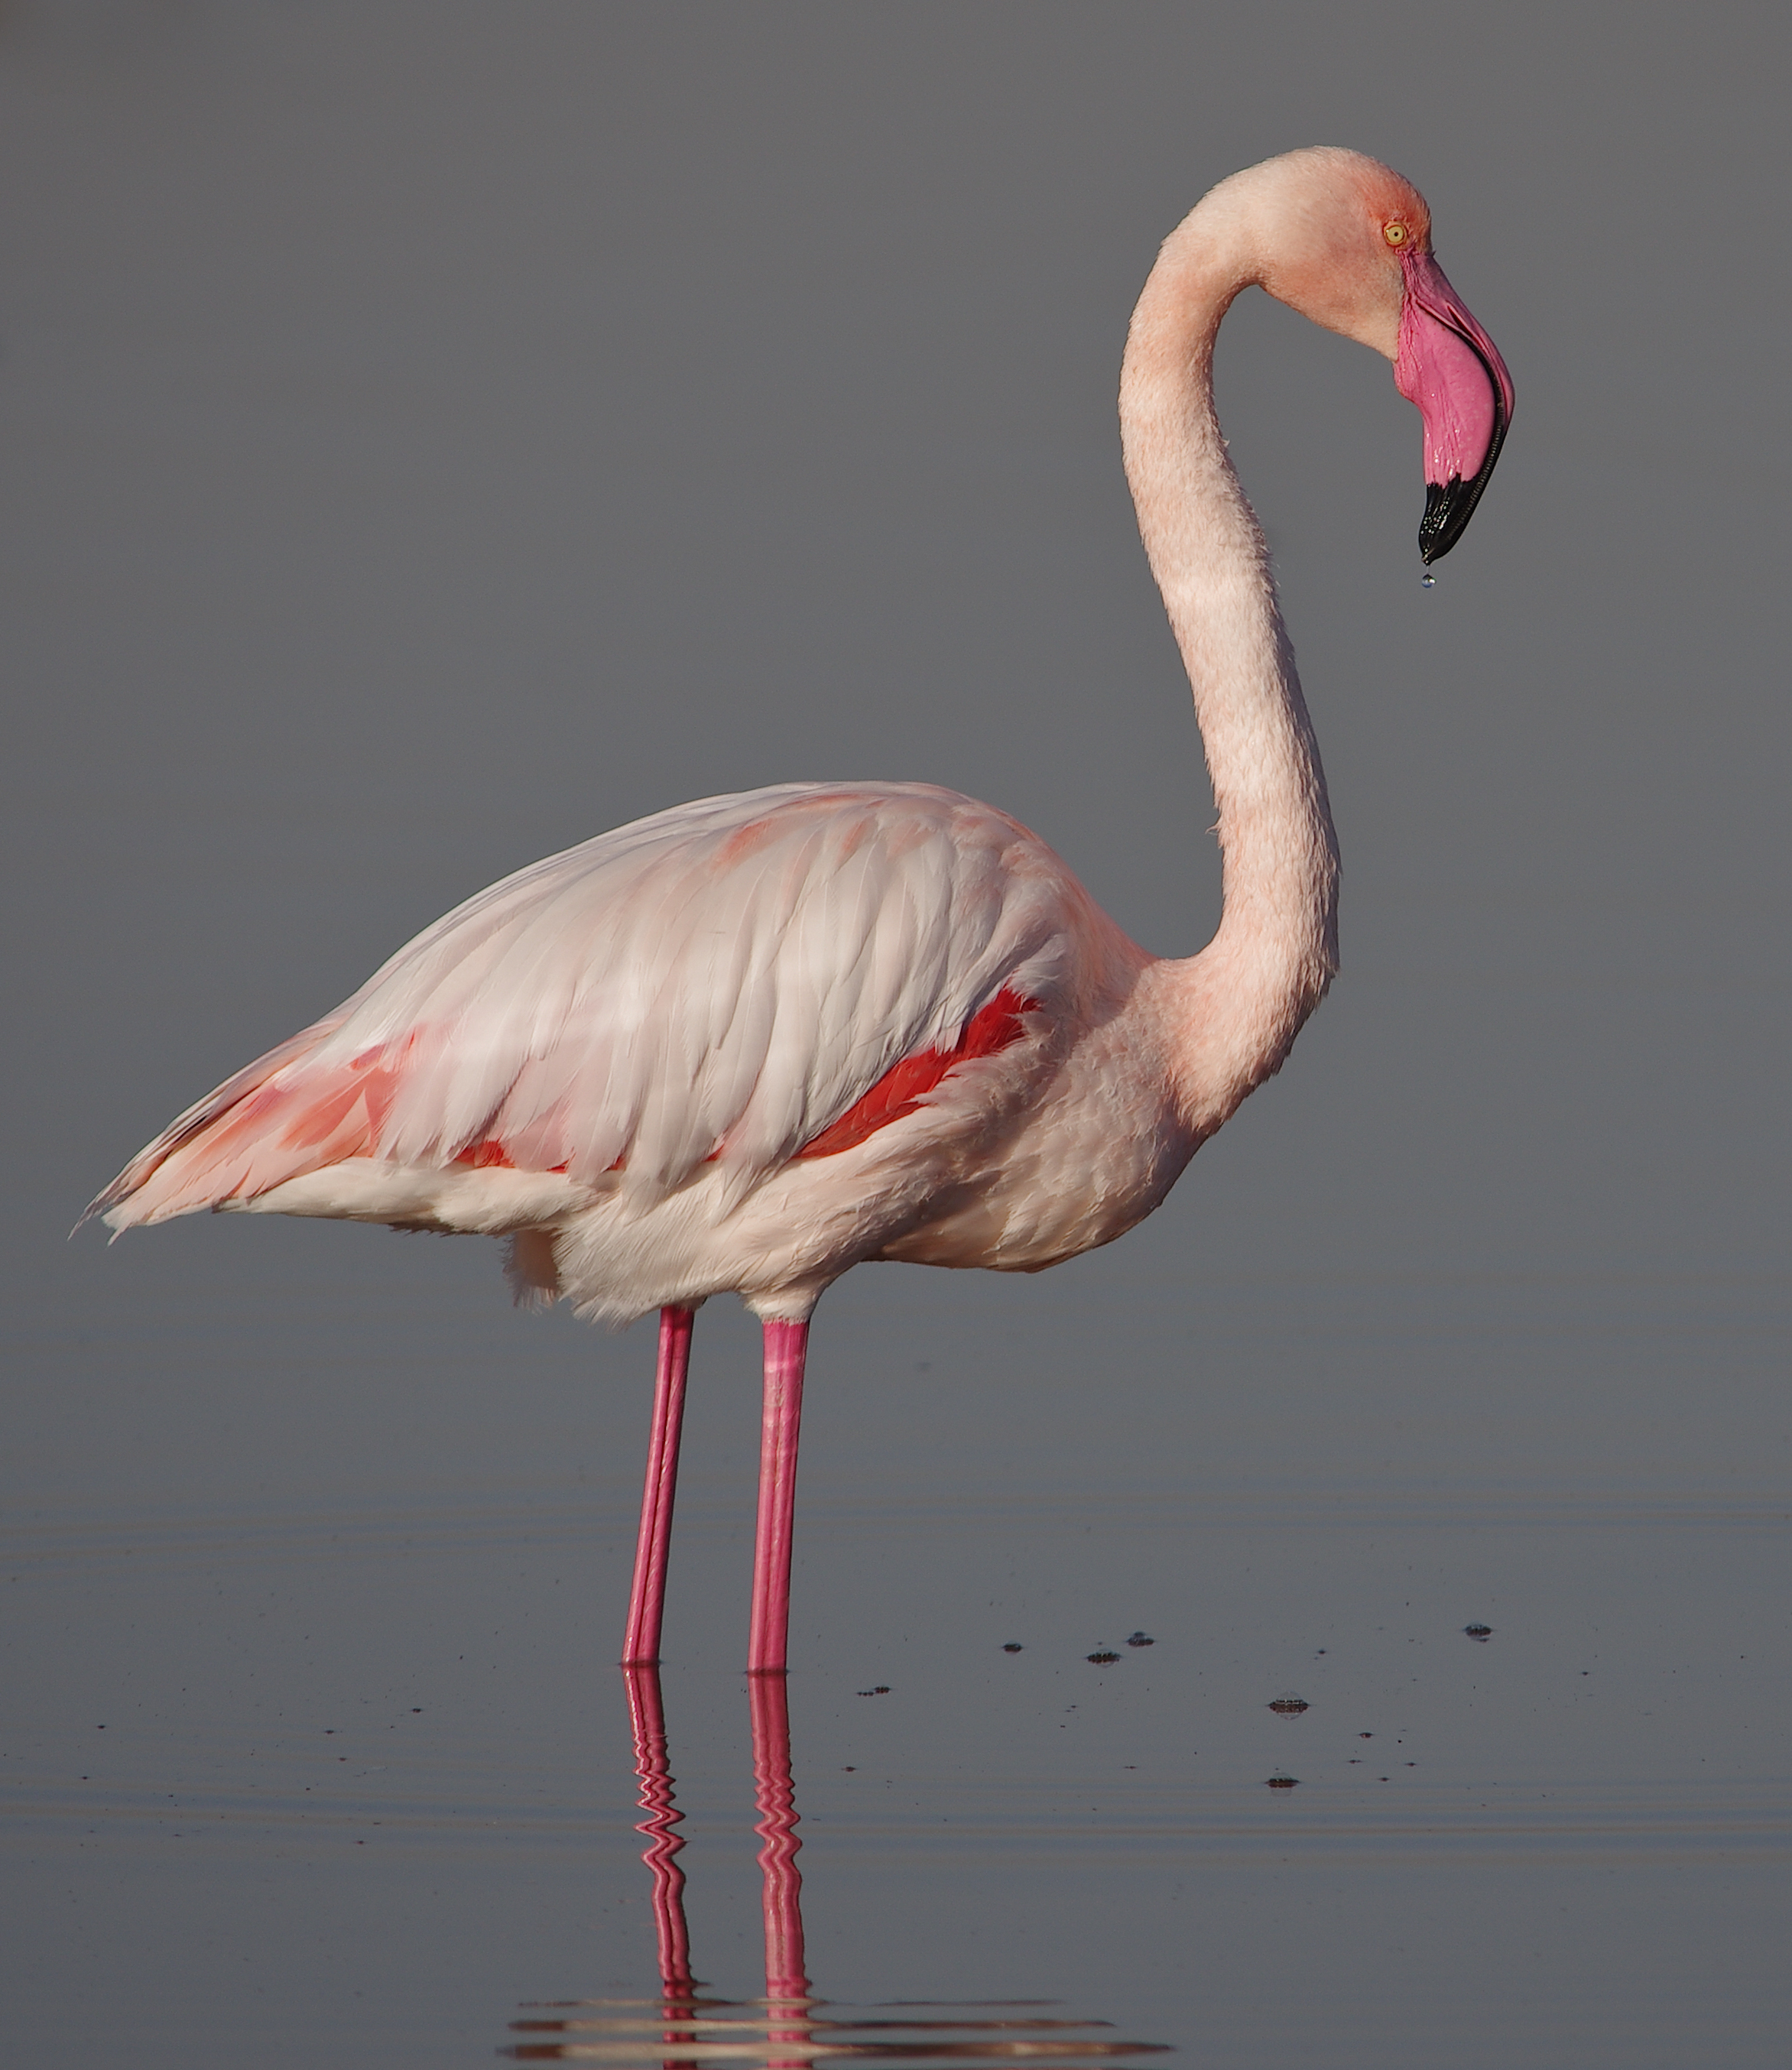 Greater flamingo (Phoenicopterus roseus). Image credit: Elgollimoh, CC by SA 3.0